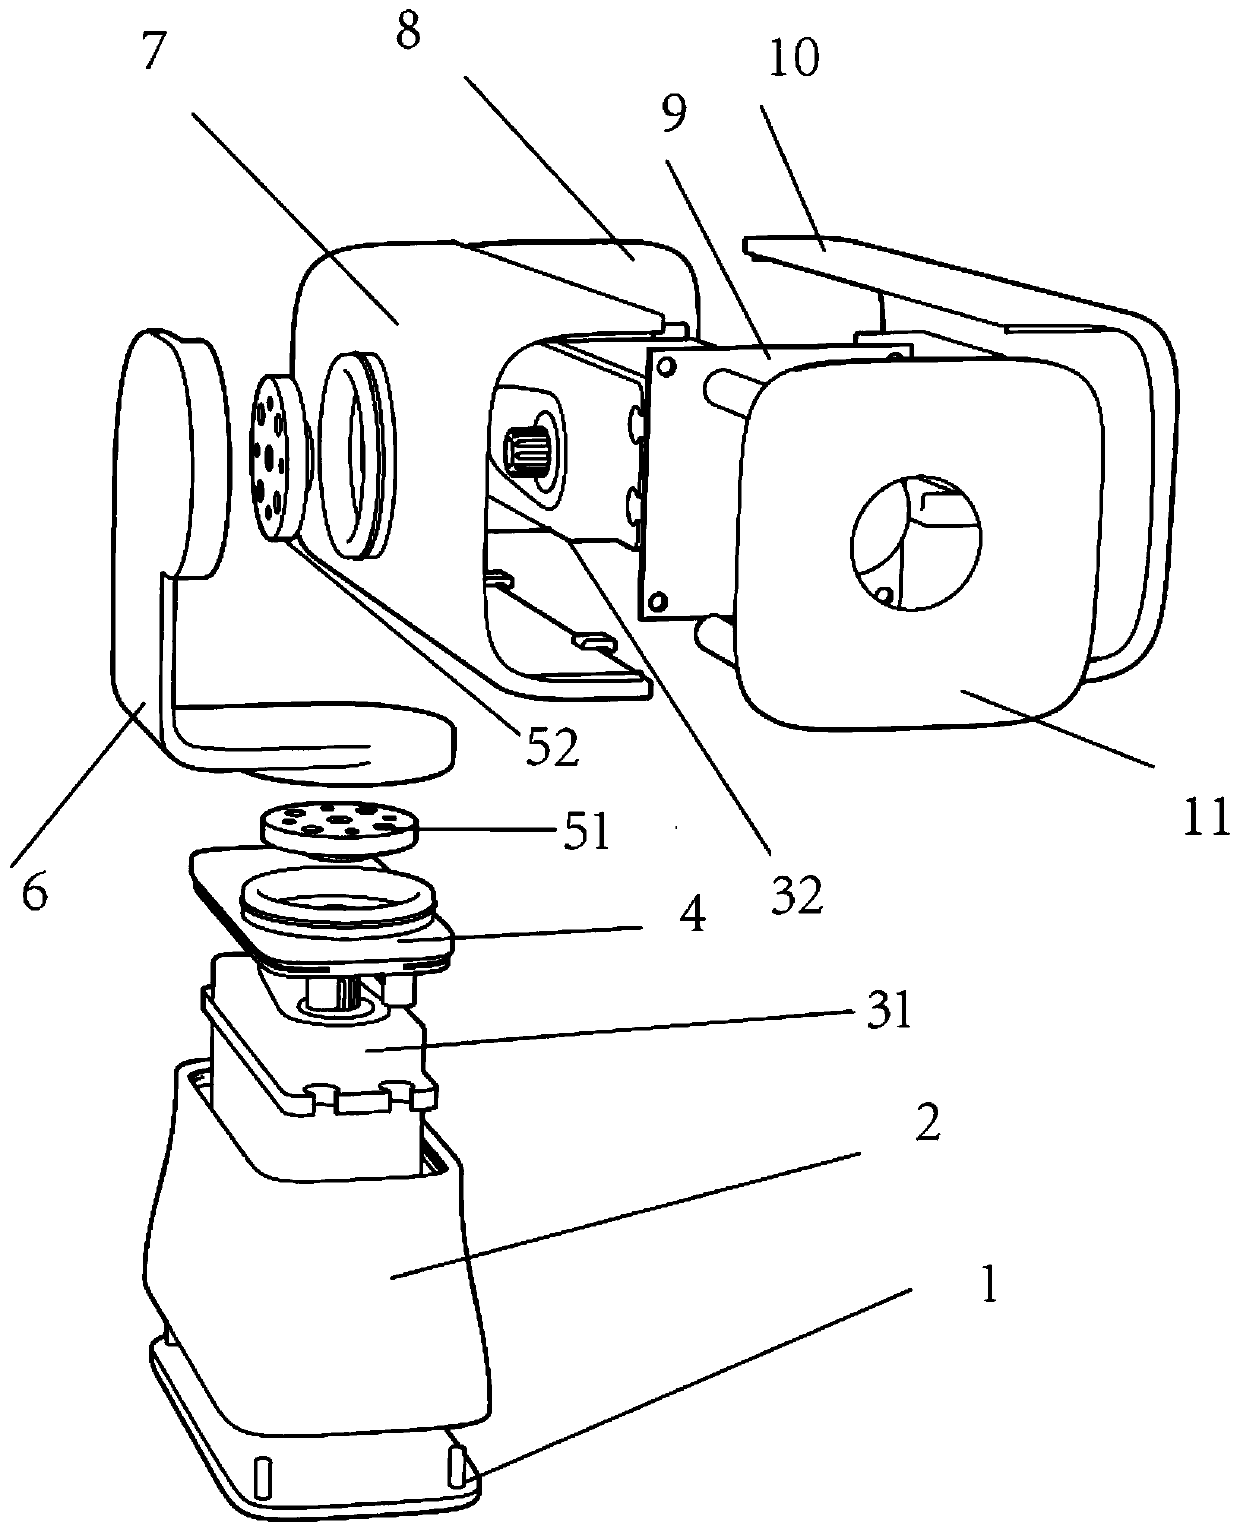 Driver face tracking device and method